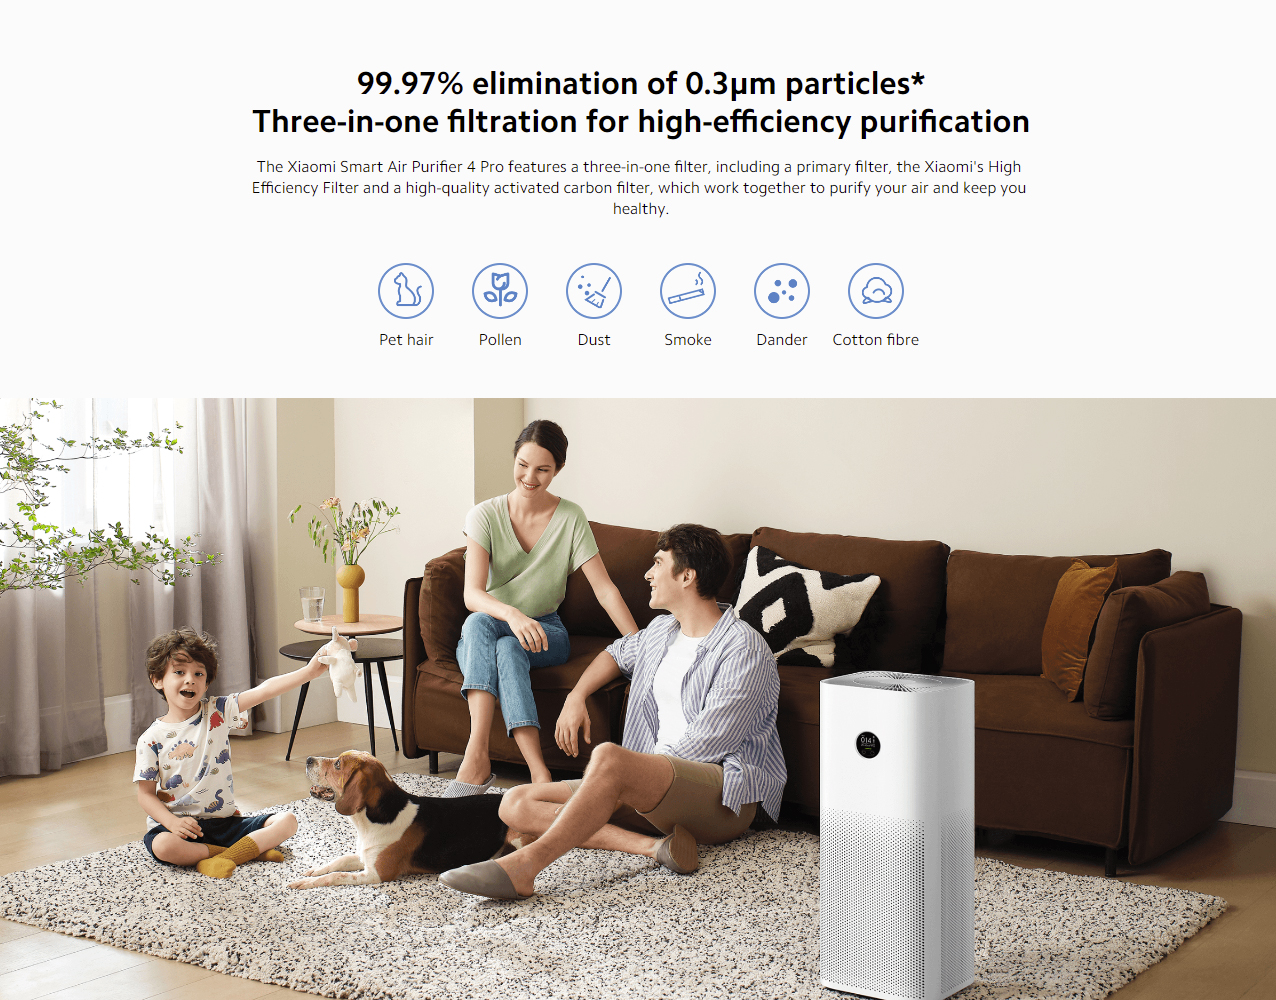 Xiaomi Smart Air Purifier 4 Pro Uk Appvoice Control Suitable For Large Room Cleaner Global Version 500 M3H Pm Cadr Oled Touch 11 Xiaomi &Lt;Table Class=&Quot;A-Normal A-Spacing-Micro&Quot;&Gt; &Lt;Tbody&Gt; &Lt;Tr Class=&Quot;A-Spacing-Small Po-Color&Quot;&Gt; &Lt;Td Class=&Quot;A-Span3&Quot;&Gt;&Lt;Span Class=&Quot;A-Size-Base A-Text-Bold&Quot;&Gt;Colour&Lt;/Span&Gt;&Lt;/Td&Gt; &Lt;Td Class=&Quot;A-Span9&Quot;&Gt;&Lt;Span Class=&Quot;A-Size-Base Po-Break-Word&Quot;&Gt;White&Lt;/Span&Gt;&Lt;/Td&Gt; &Lt;/Tr&Gt; &Lt;Tr Class=&Quot;A-Spacing-Small Po-Brand&Quot;&Gt; &Lt;Td Class=&Quot;A-Span3&Quot;&Gt;&Lt;Span Class=&Quot;A-Size-Base A-Text-Bold&Quot;&Gt;Brand&Lt;/Span&Gt;&Lt;/Td&Gt; &Lt;Td Class=&Quot;A-Span9&Quot;&Gt;&Lt;Span Class=&Quot;A-Size-Base Po-Break-Word&Quot;&Gt;Xiaomi&Lt;/Span&Gt;&Lt;/Td&Gt; &Lt;/Tr&Gt; &Lt;Tr Class=&Quot;A-Spacing-Small Po-Item_Depth_Width_Height&Quot;&Gt; &Lt;Td Class=&Quot;A-Span3&Quot;&Gt;&Lt;Span Class=&Quot;A-Size-Base A-Text-Bold&Quot;&Gt;Product Dimensions&Lt;/Span&Gt;&Lt;/Td&Gt; &Lt;Td Class=&Quot;A-Span9&Quot;&Gt;&Lt;Span Class=&Quot;A-Size-Base Po-Break-Word&Quot;&Gt;27.5D X 27.5W X 68H Centimeters&Lt;/Span&Gt;&Lt;/Td&Gt; &Lt;/Tr&Gt; &Lt;Tr Class=&Quot;A-Spacing-Small Po-Power_Source_Type&Quot;&Gt; &Lt;Td Class=&Quot;A-Span3&Quot;&Gt;&Lt;Span Class=&Quot;A-Size-Base A-Text-Bold&Quot;&Gt;Power Source&Lt;/Span&Gt;&Lt;/Td&Gt; &Lt;Td Class=&Quot;A-Span9&Quot;&Gt;&Lt;Span Class=&Quot;A-Size-Base Po-Break-Word&Quot;&Gt;Corded Electric&Lt;/Span&Gt;&Lt;/Td&Gt; &Lt;/Tr&Gt; &Lt;Tr Class=&Quot;A-Spacing-Small Po-Item_Weight&Quot;&Gt; &Lt;Td Class=&Quot;A-Span3&Quot;&Gt;&Lt;Span Class=&Quot;A-Size-Base A-Text-Bold&Quot;&Gt;Item Weight&Lt;/Span&Gt;&Lt;/Td&Gt; &Lt;Td Class=&Quot;A-Span9&Quot;&Gt;&Lt;Span Class=&Quot;A-Size-Base Po-Break-Word&Quot;&Gt;6.8 Kilograms&Lt;/Span&Gt;&Lt;/Td&Gt; &Lt;/Tr&Gt; &Lt;/Tbody&Gt; &Lt;/Table&Gt; &Lt;H5&Gt;We Also Provide International Wholesale And Retail Shipping To All Gcc Countries: Saudi Arabia, Qatar, Oman, Kuwait, Bahrain.&Lt;/H5&Gt; Xiaomi Xiaomi Smart Air Purifier 4 Pro